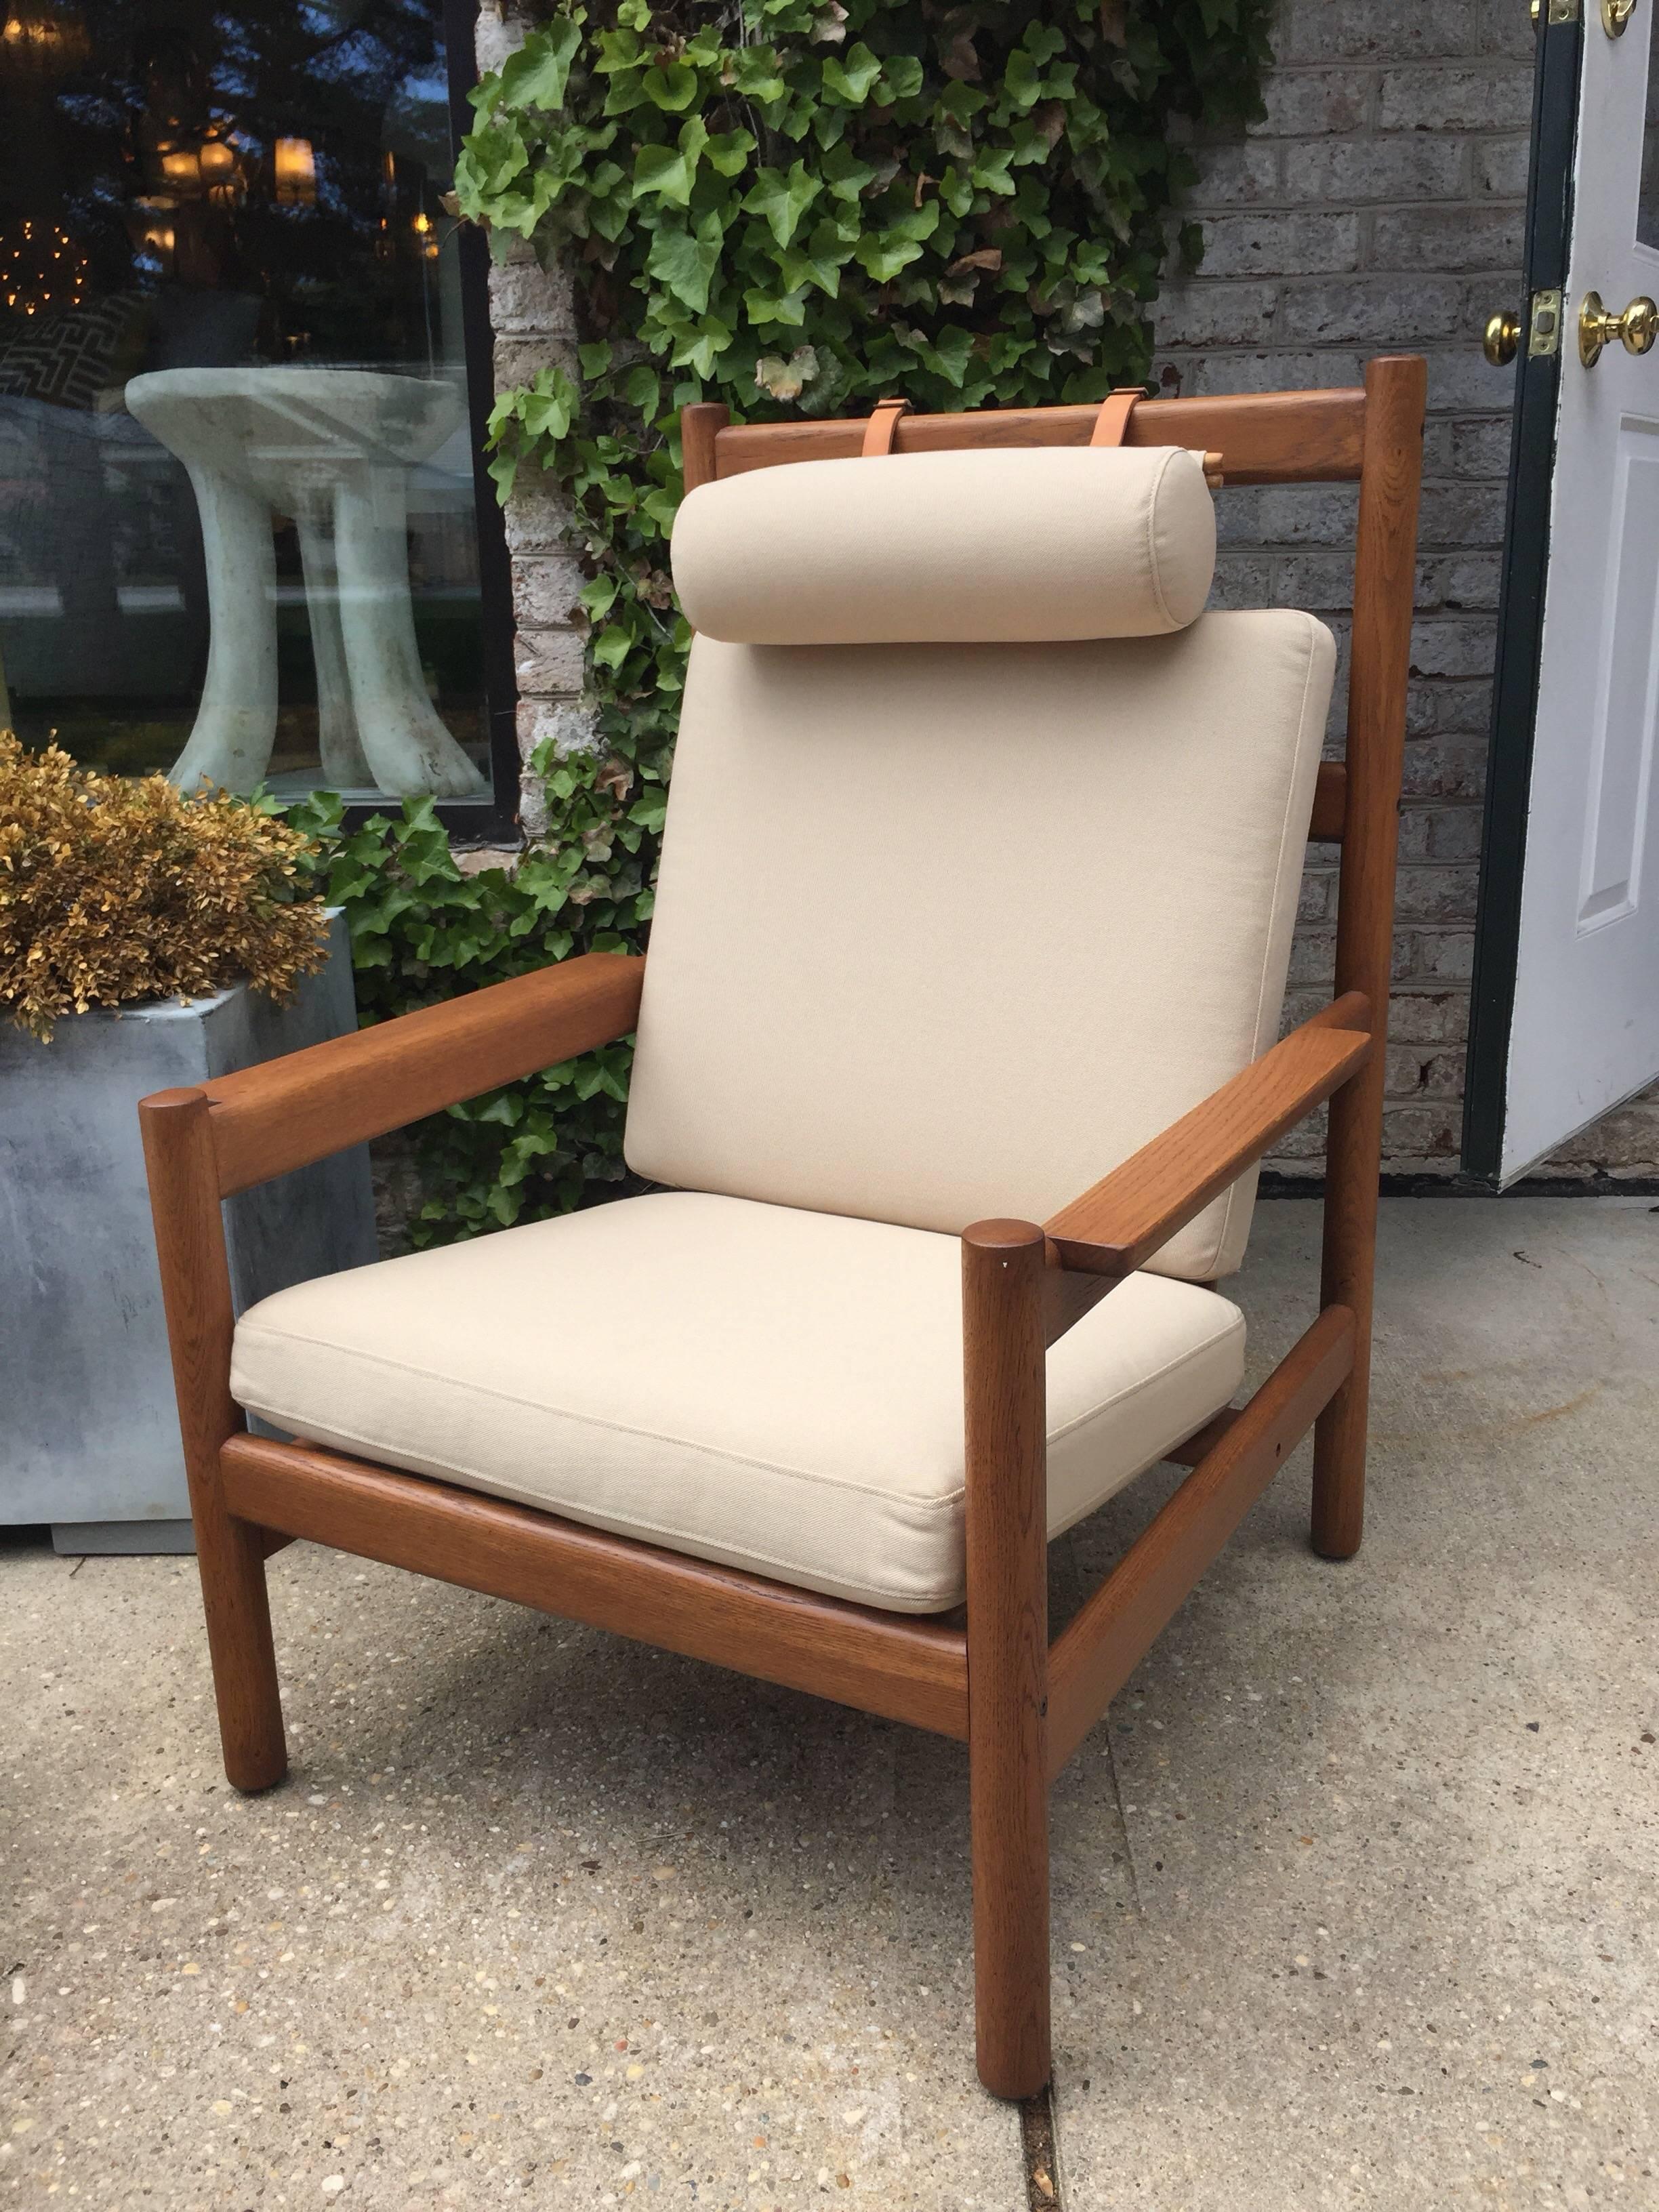 Rare Vintage Arne Norell Teak Armchair and Ottoman with Leather Straps For Sale 2